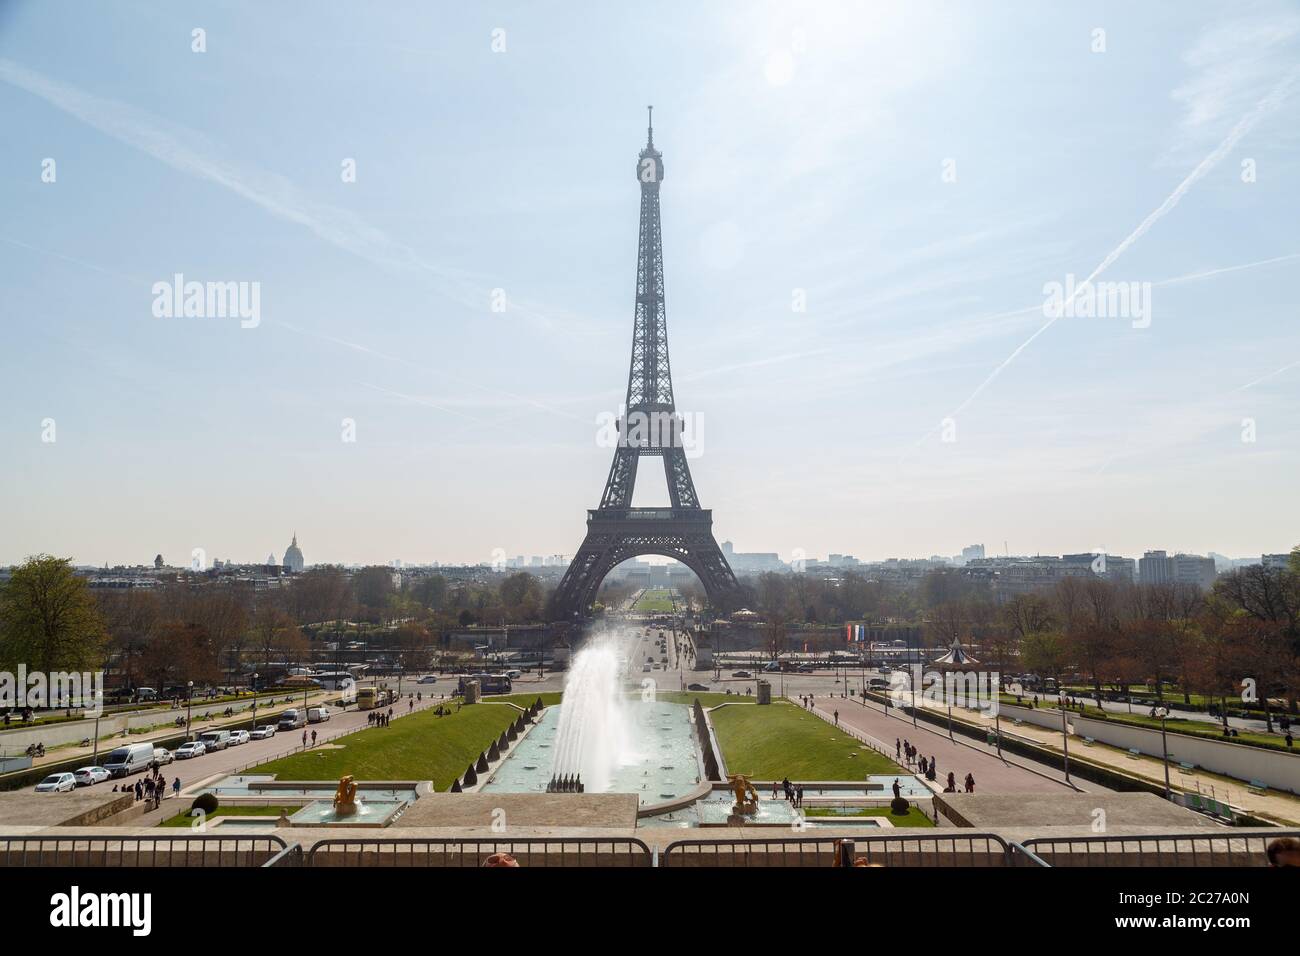 The Eiffel tower in daylight blue sky with some cloud. Champ de Mars park and people in foreground Stock Photo